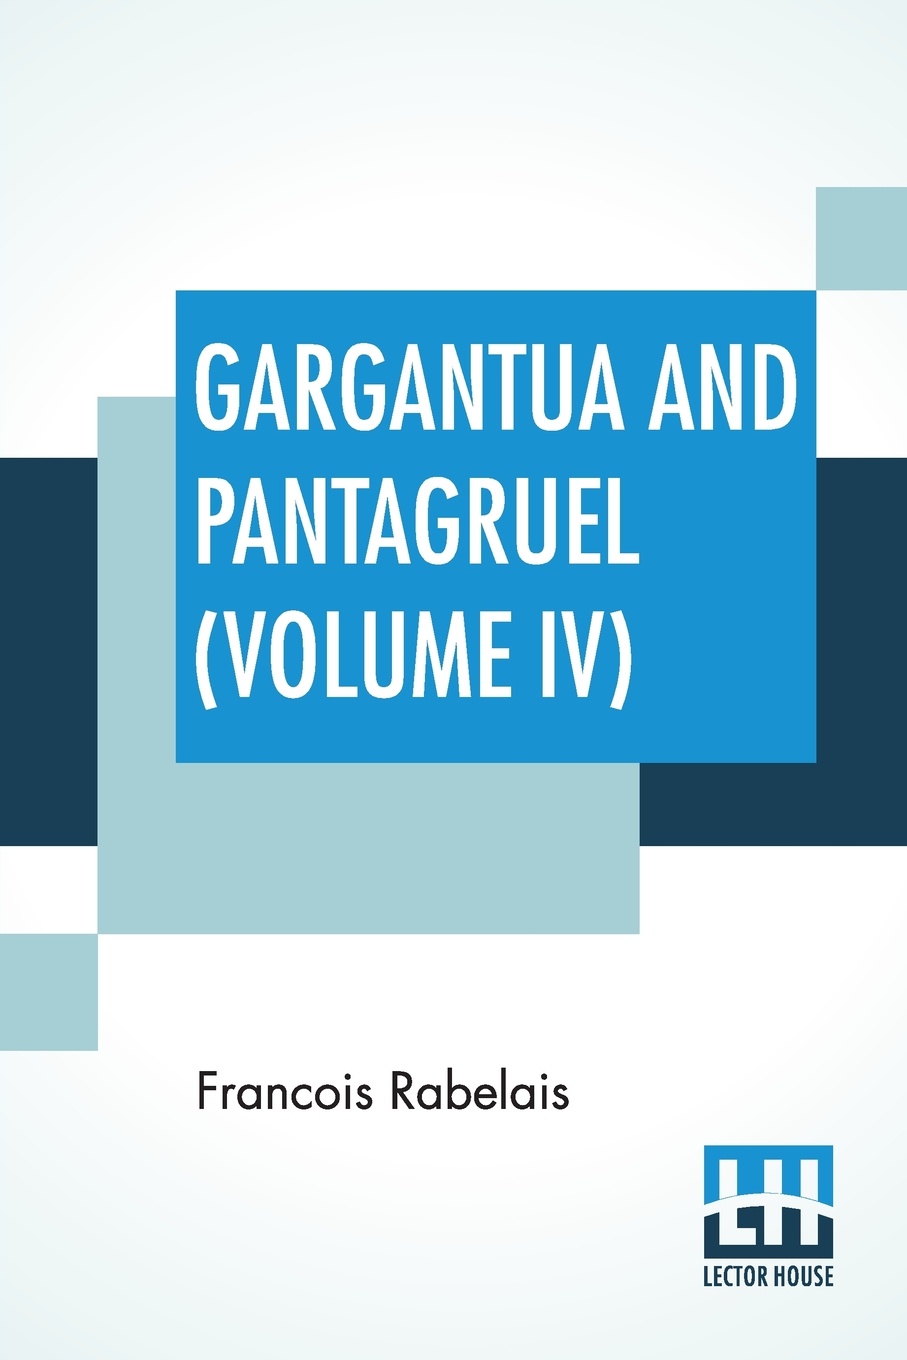 Gargantua And Pantagruel (Volume IV). Five Books Of The Lives, Heroic Deeds And Sayings Of Gargantua And His Son Pantagruel, Translated Into English By Sir Thomas Urquhart Of Cromarty And Peter Antony Motteux